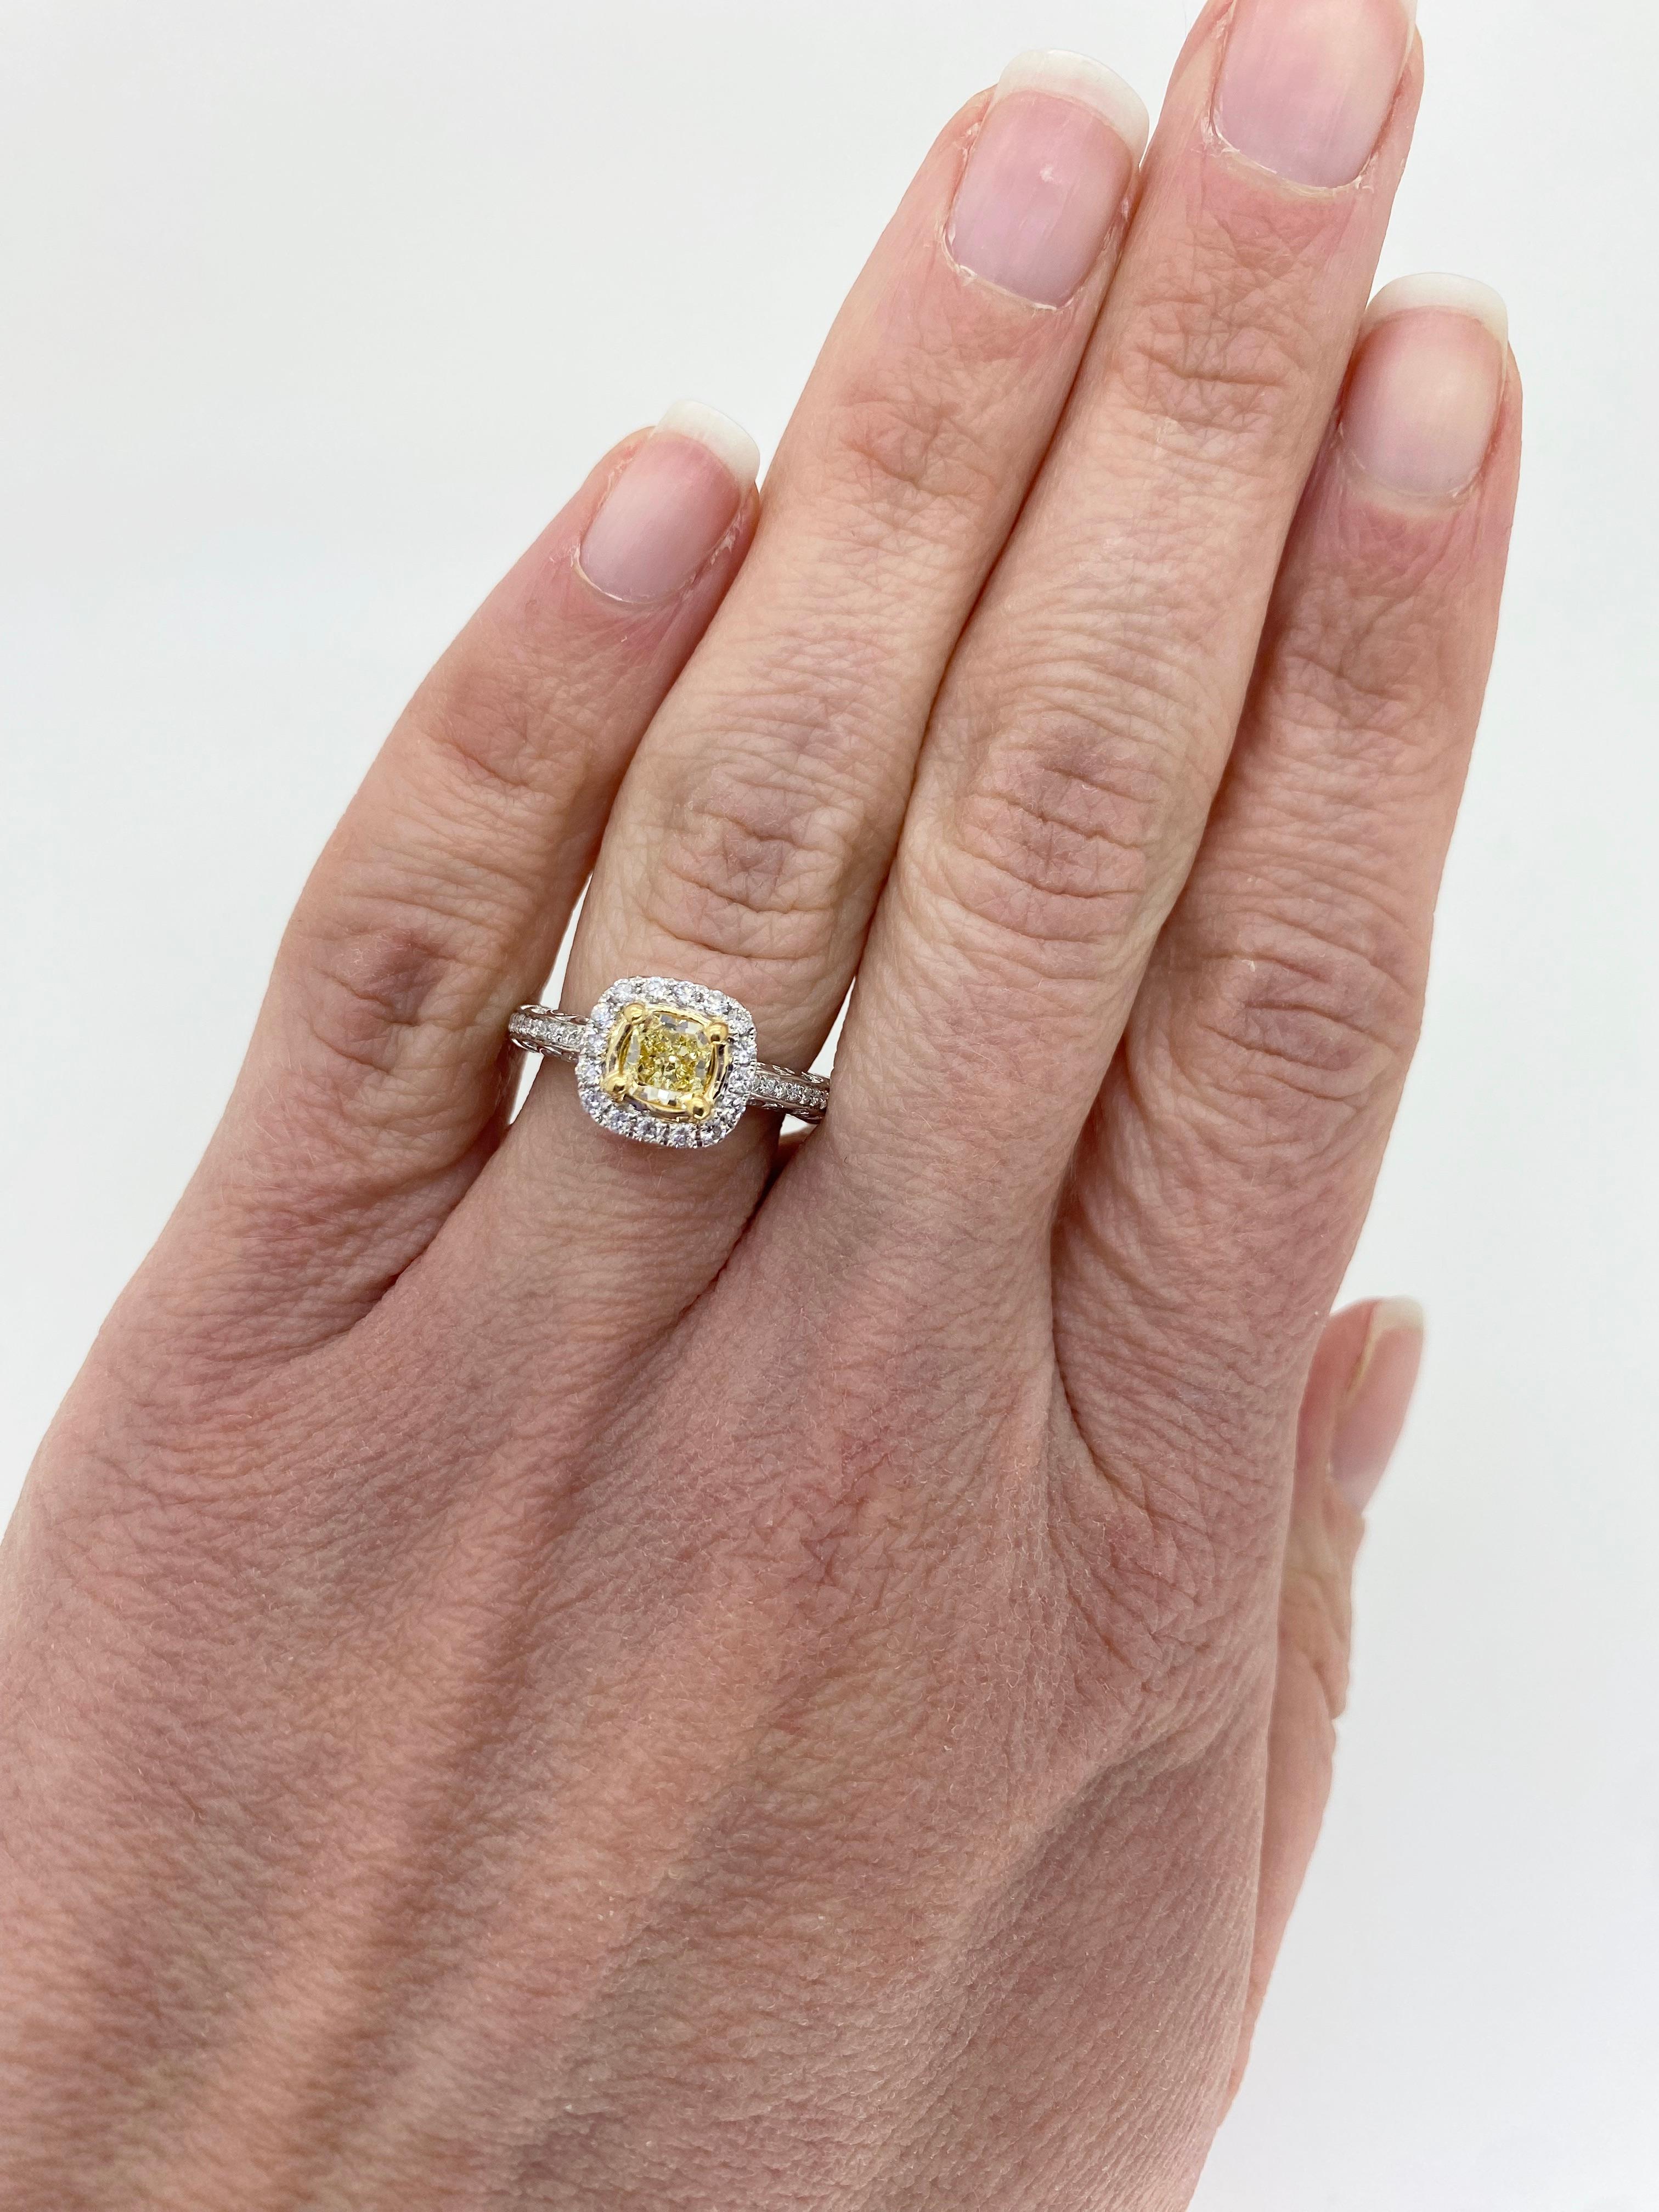 Fancy Yellow Diamond Halo Engagement Ring in 18k For Sale 10